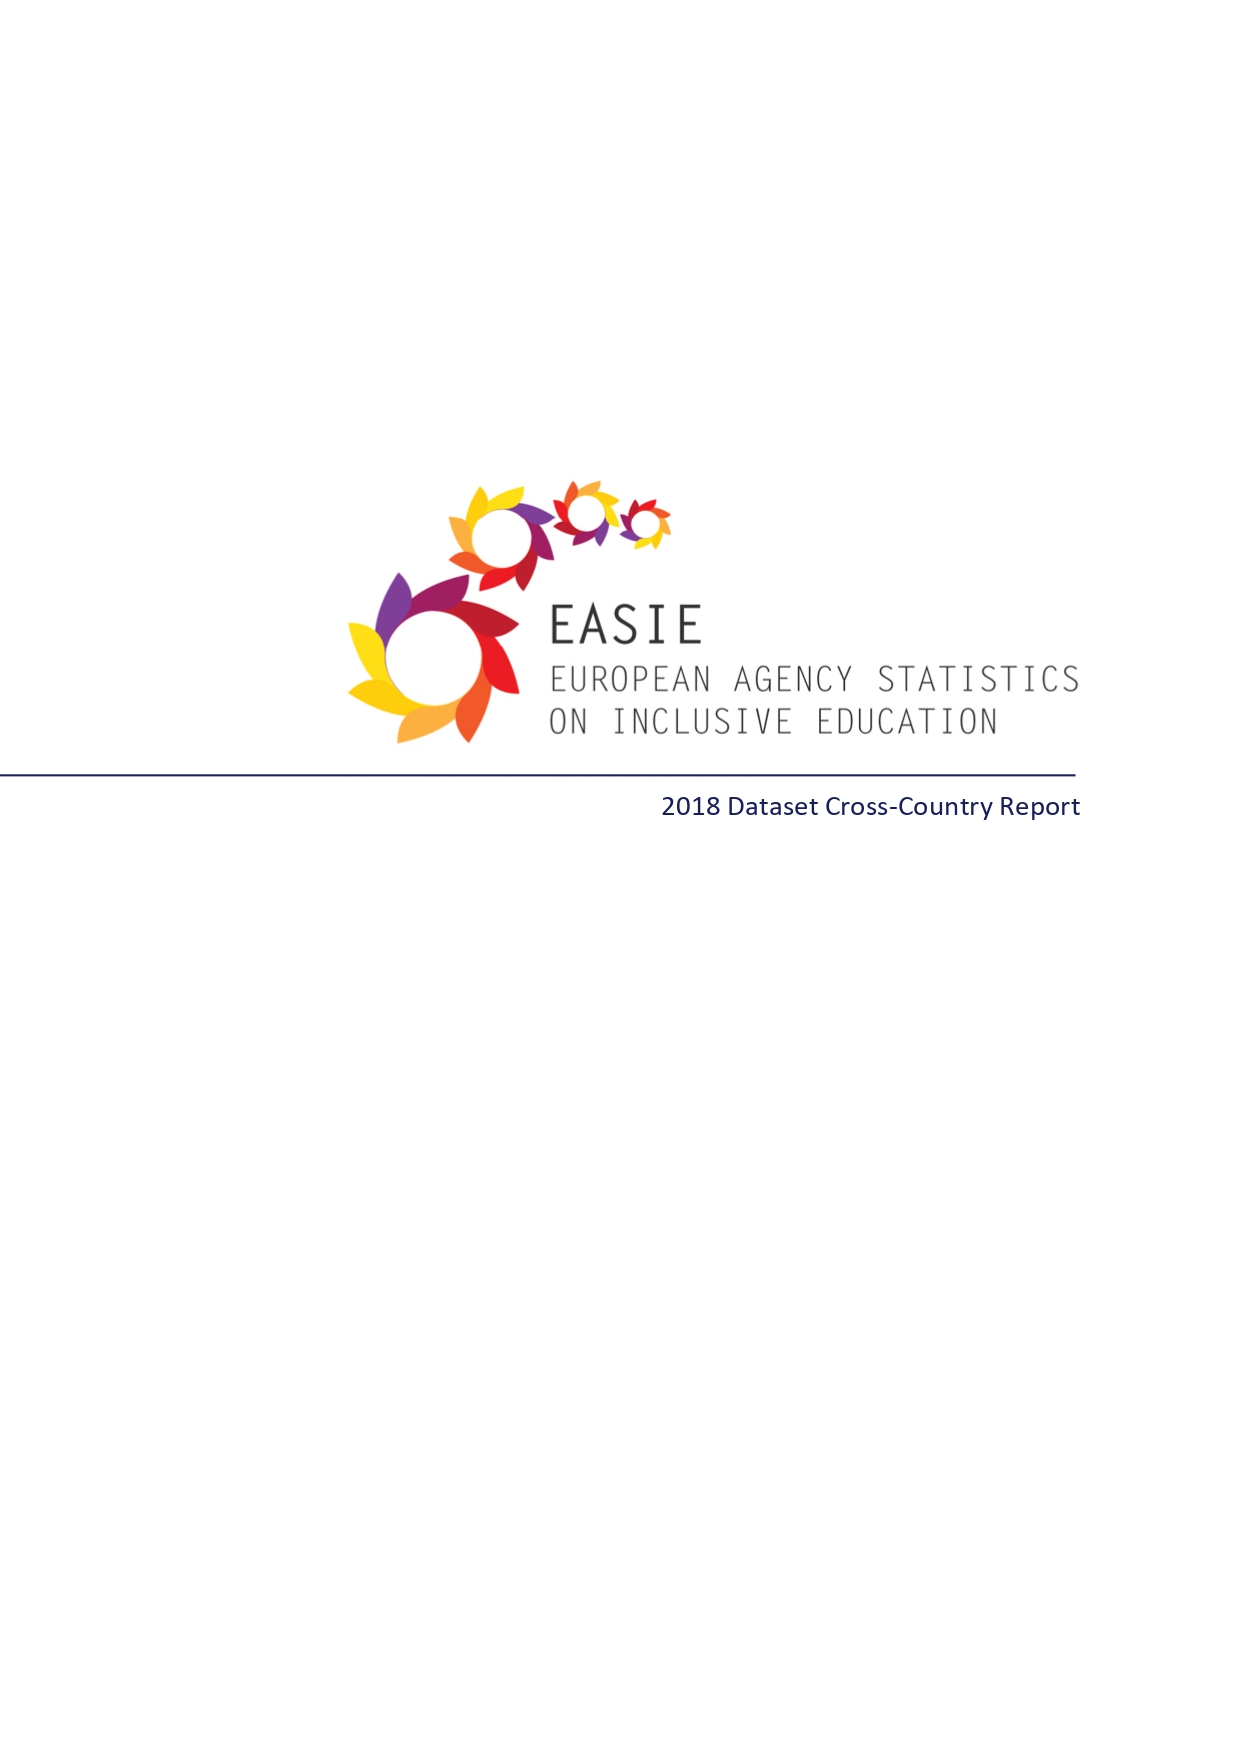 EASIE CCR cover page